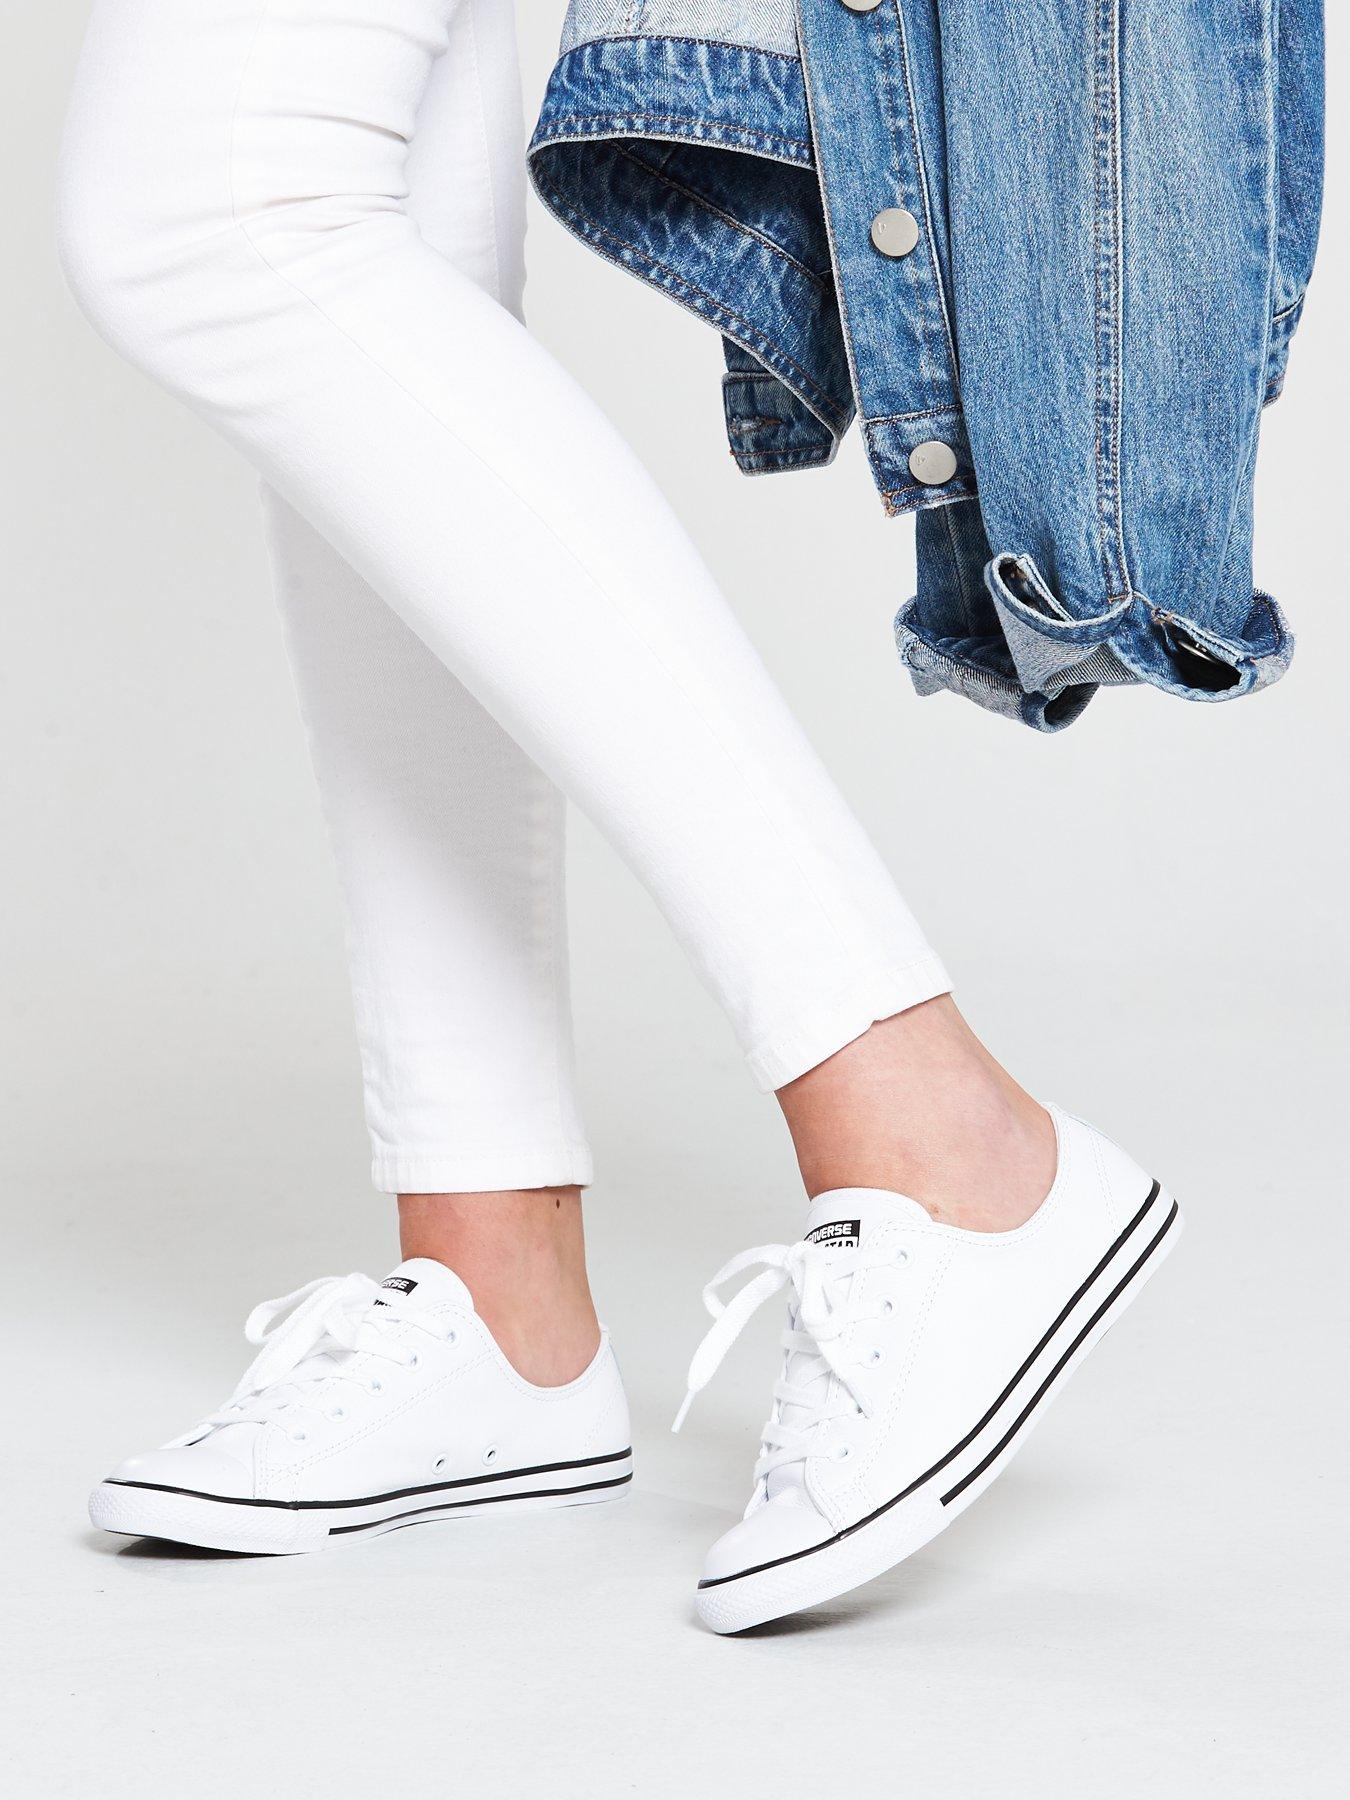 converse dainty leather white